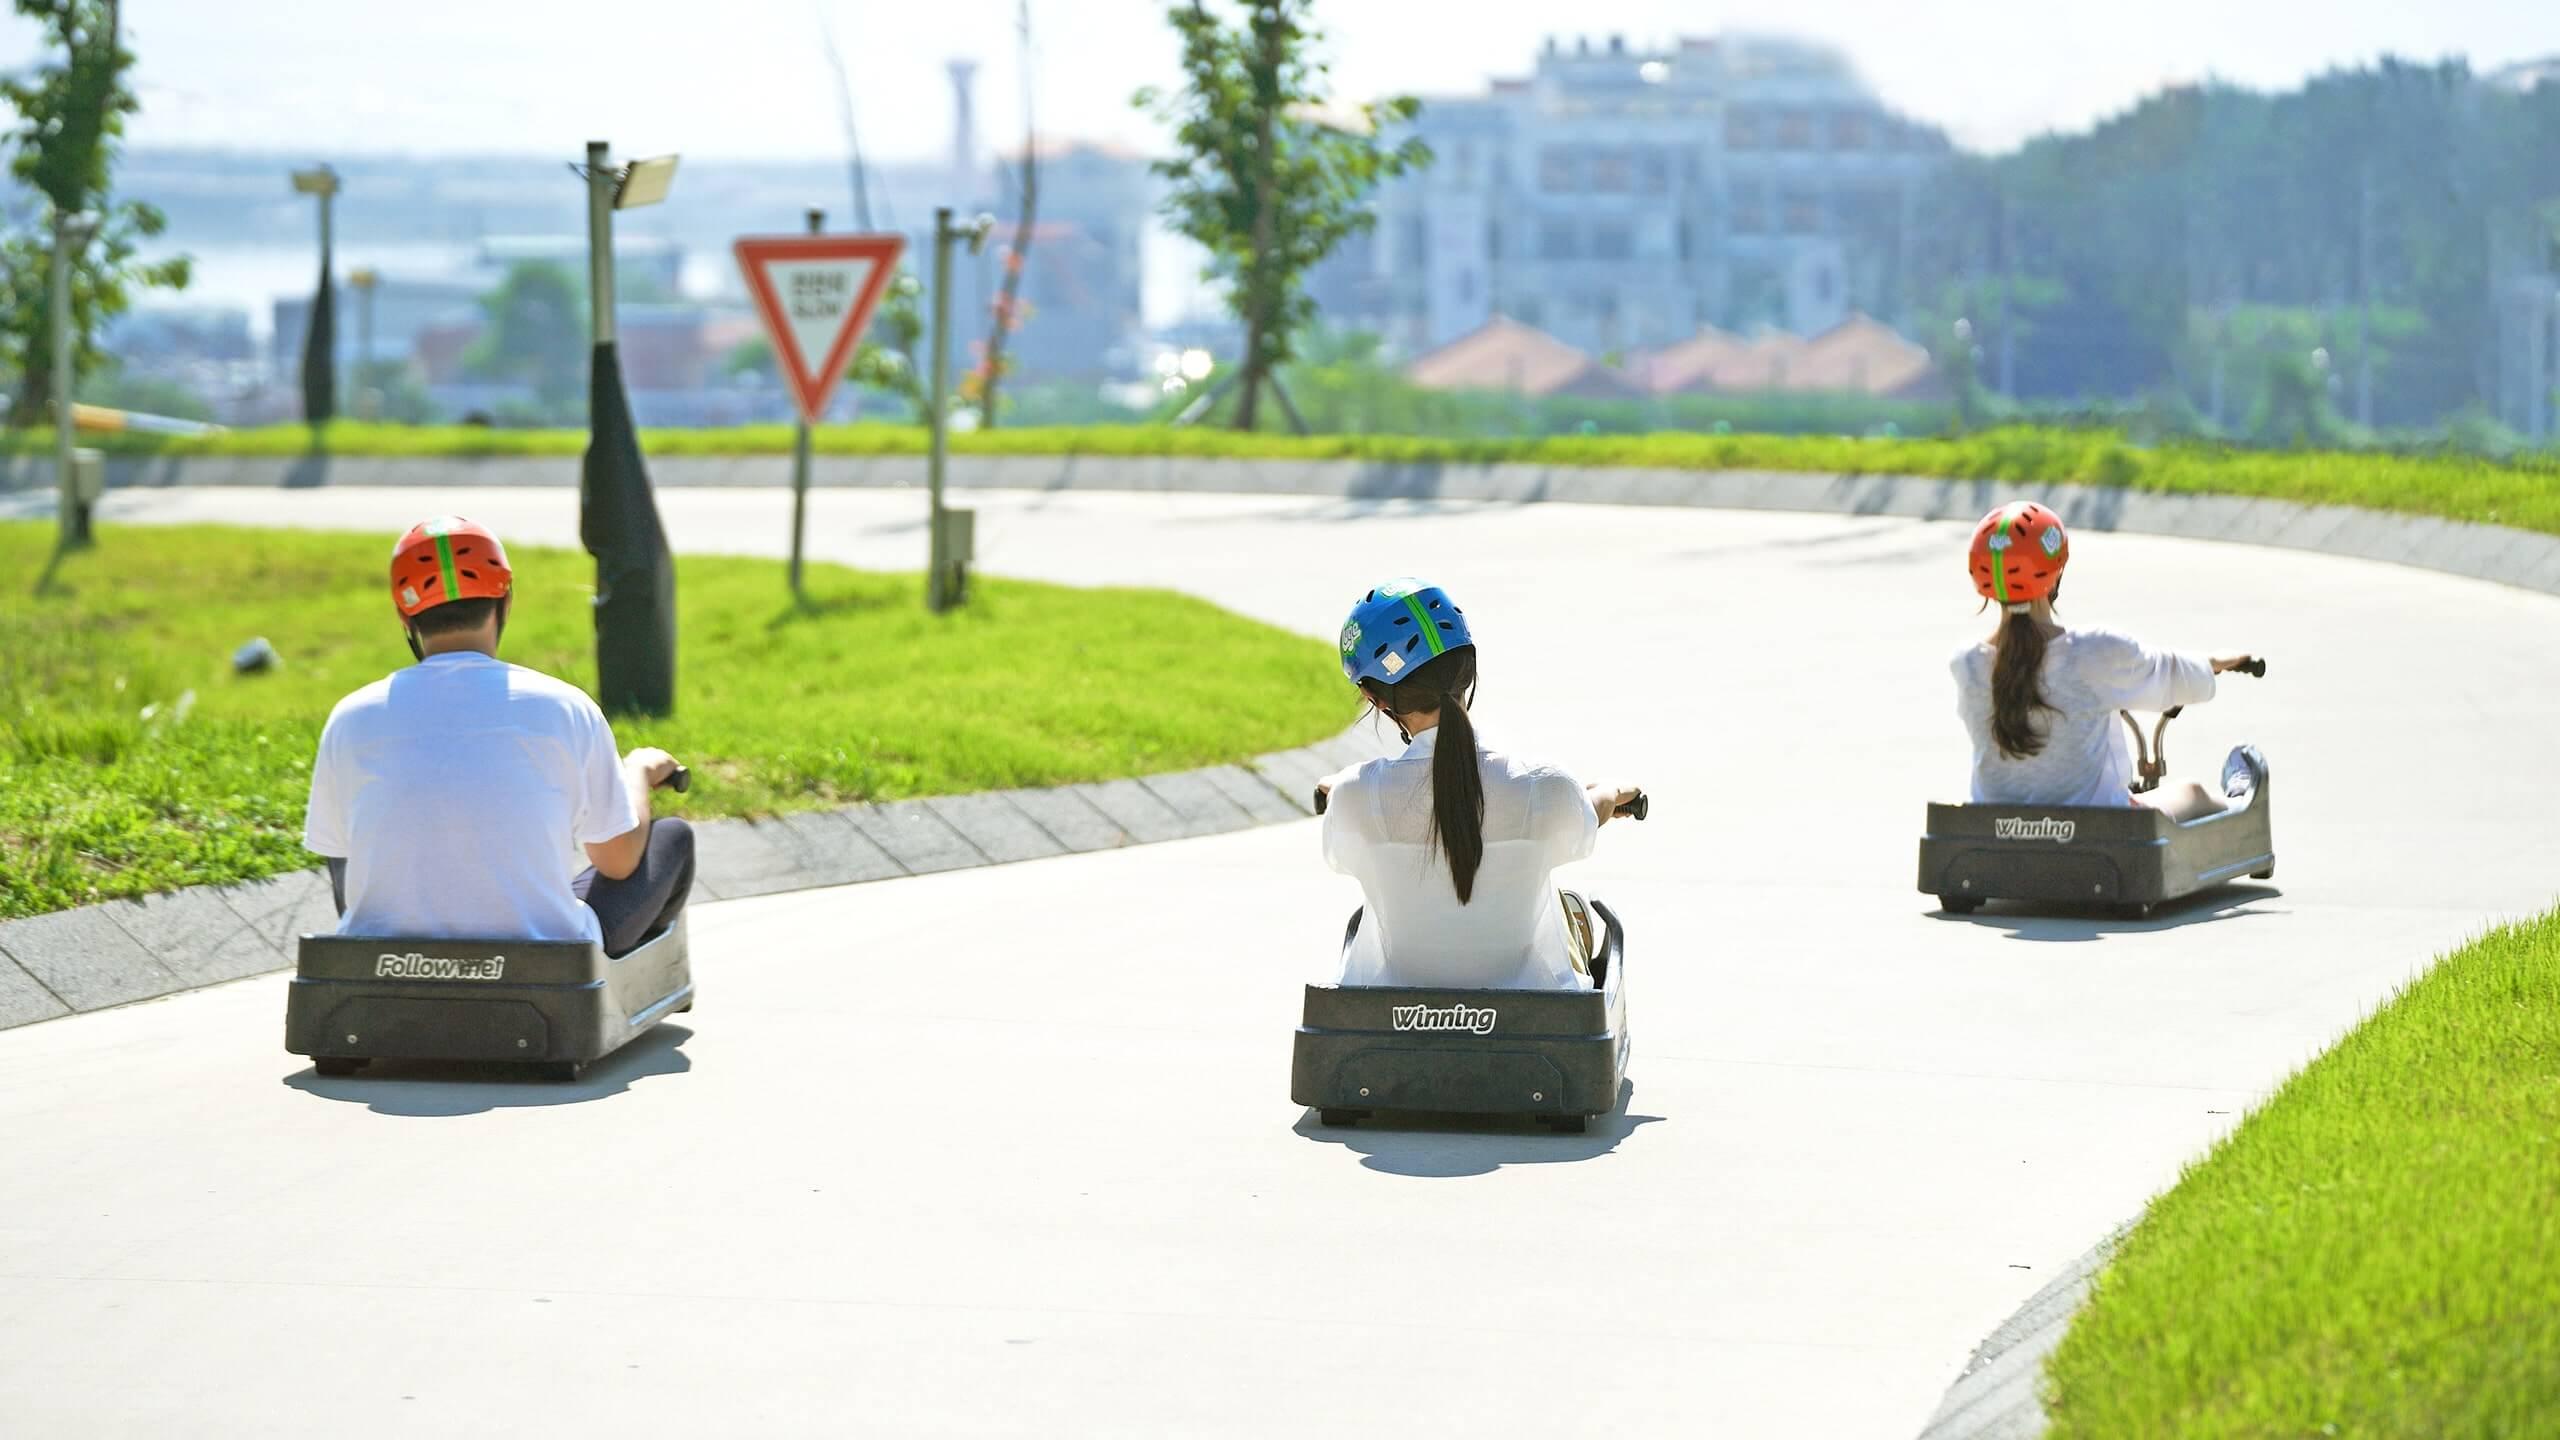 Three people race down the Luge tracks at Skyline Luge busan.